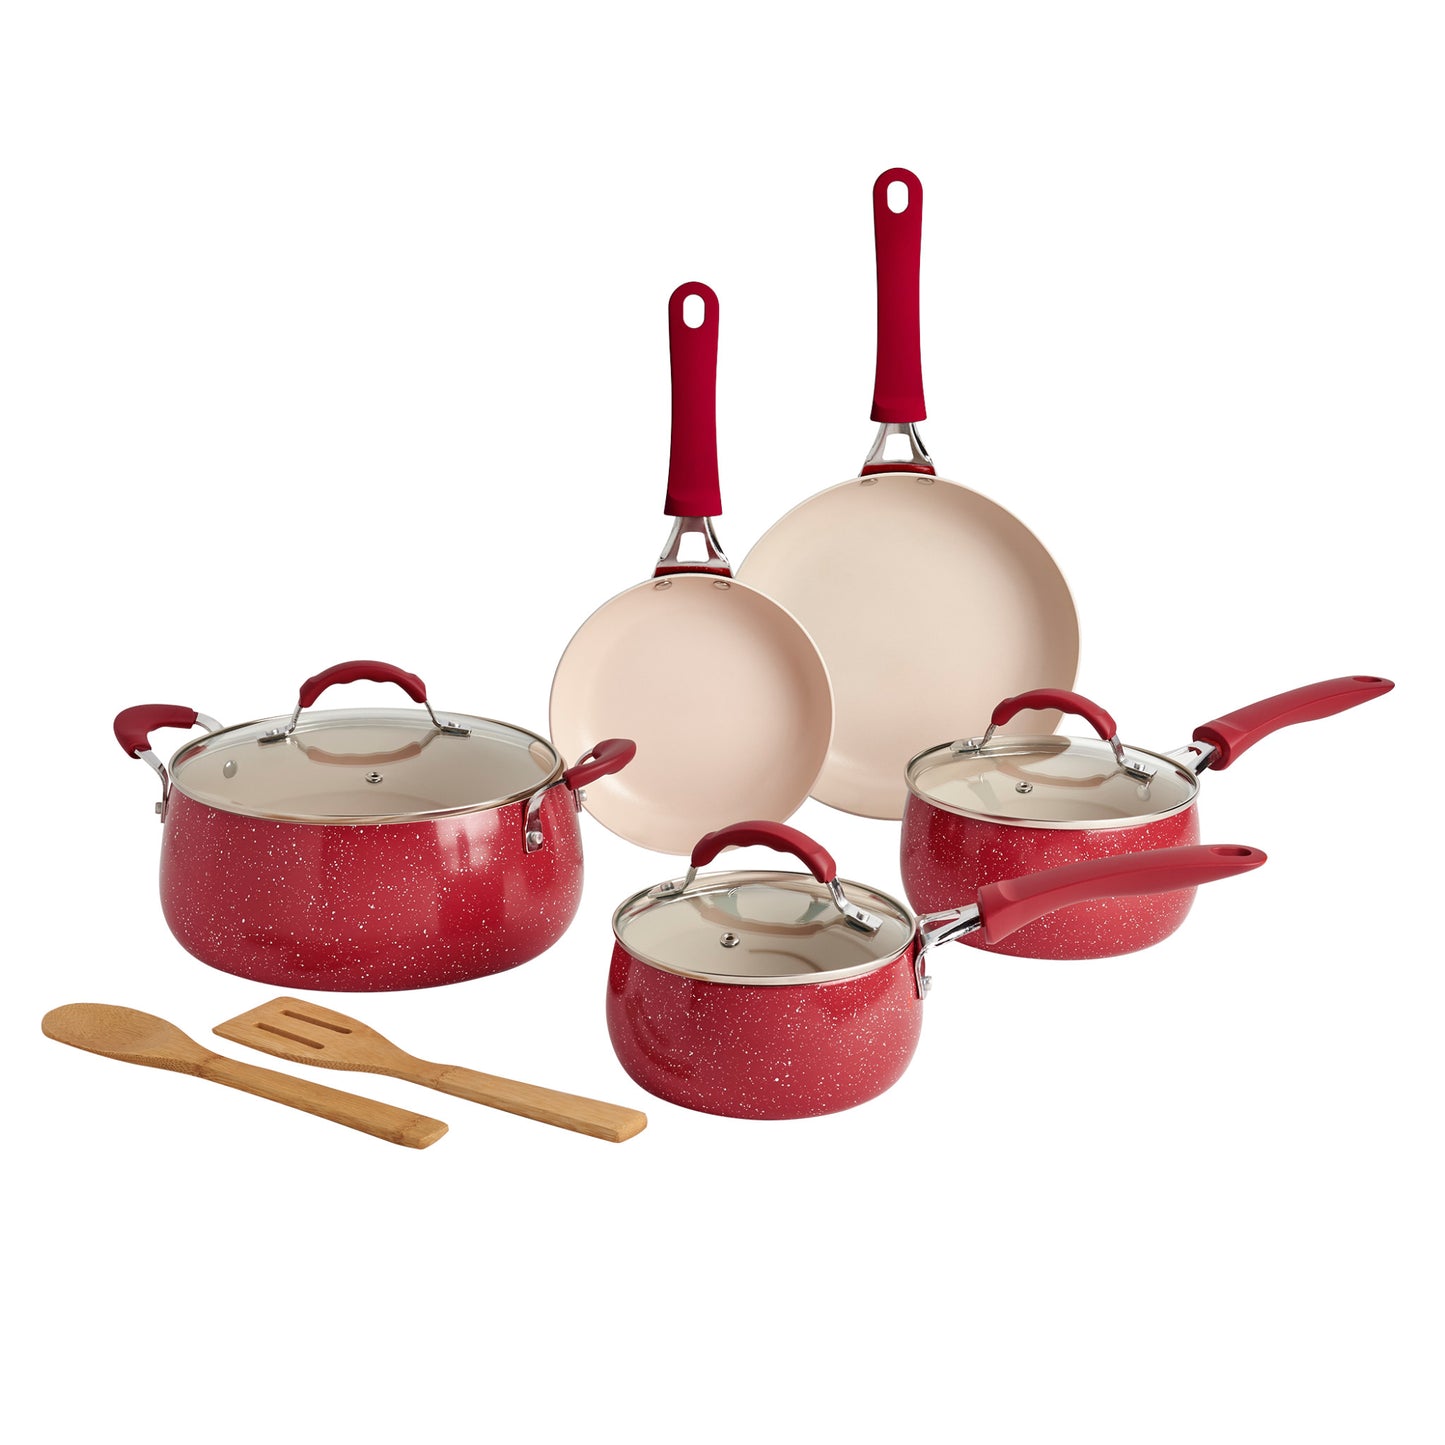 Dolly 10pc. Non-Stick Aluminum Cookware Set - Speckled Red